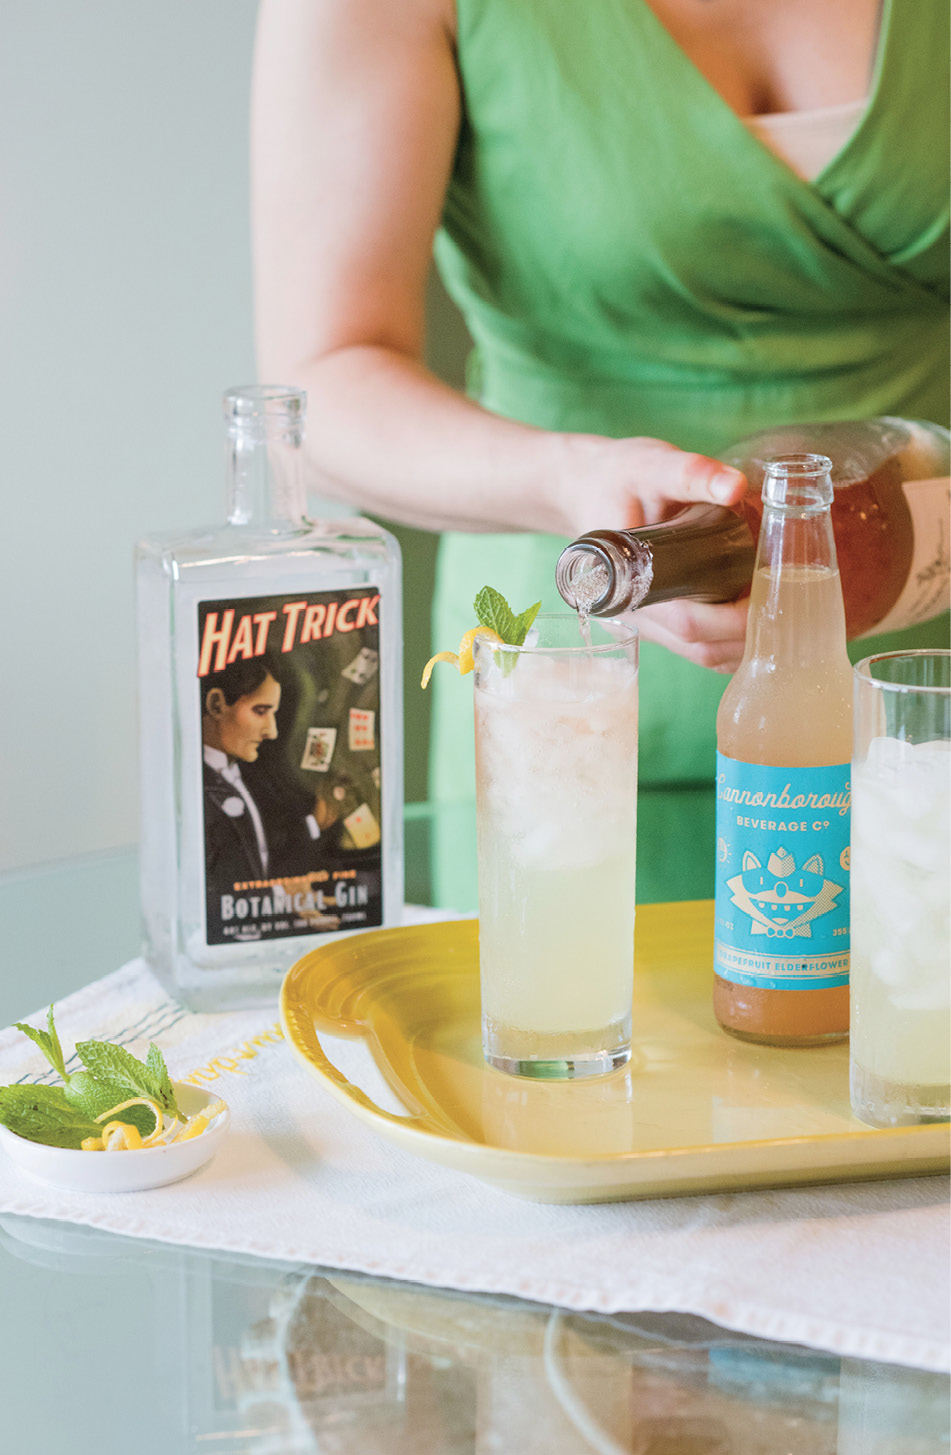 For a refreshing sip, mix Hat Trick gin with Cannonborough grapefruit soda and a splash of sparkling rosé